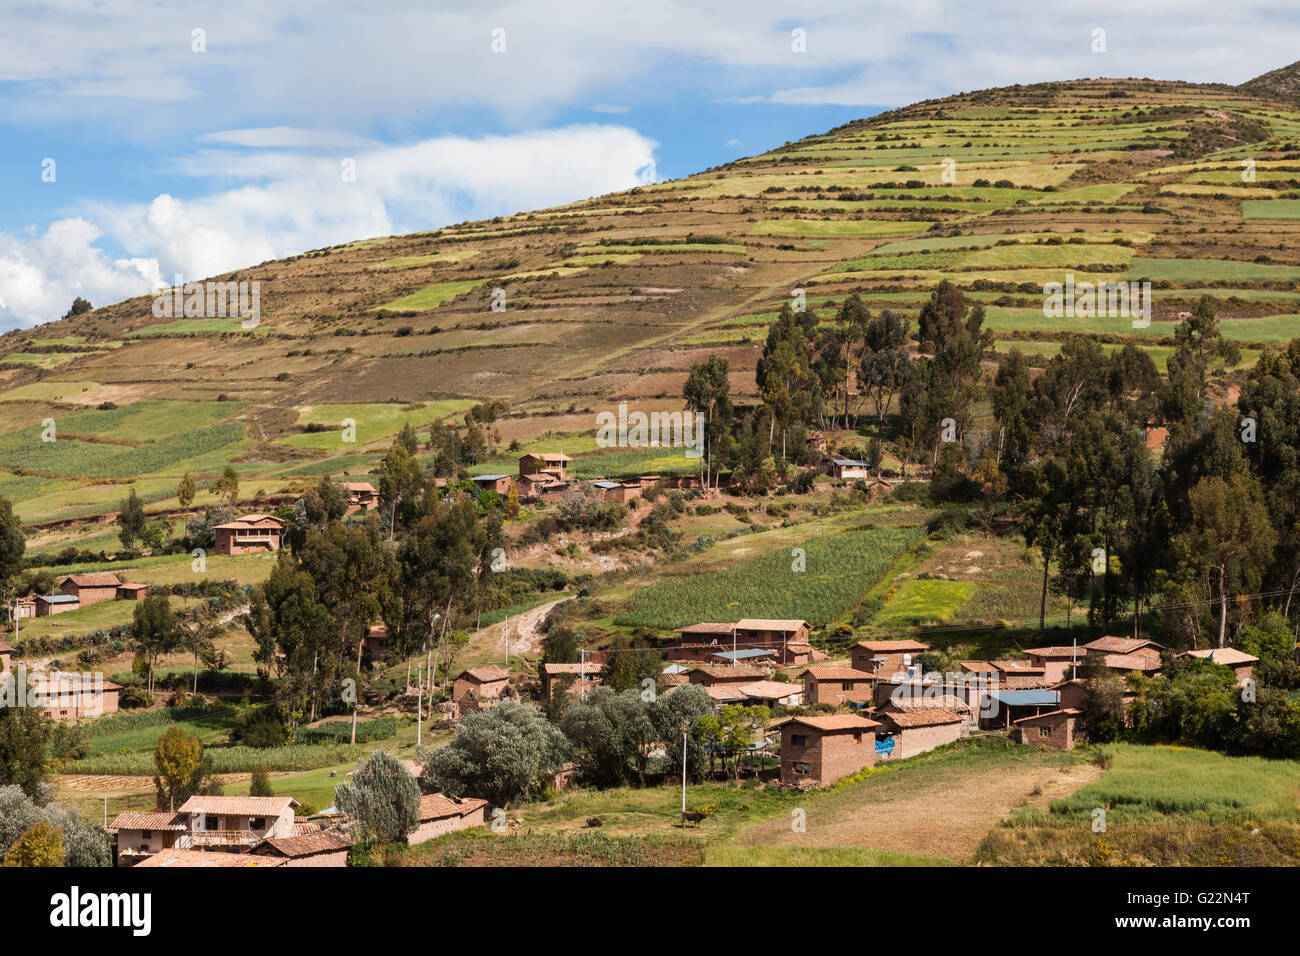 Cultivated fields above the Andean village of Misminay, Peru Stock Photo